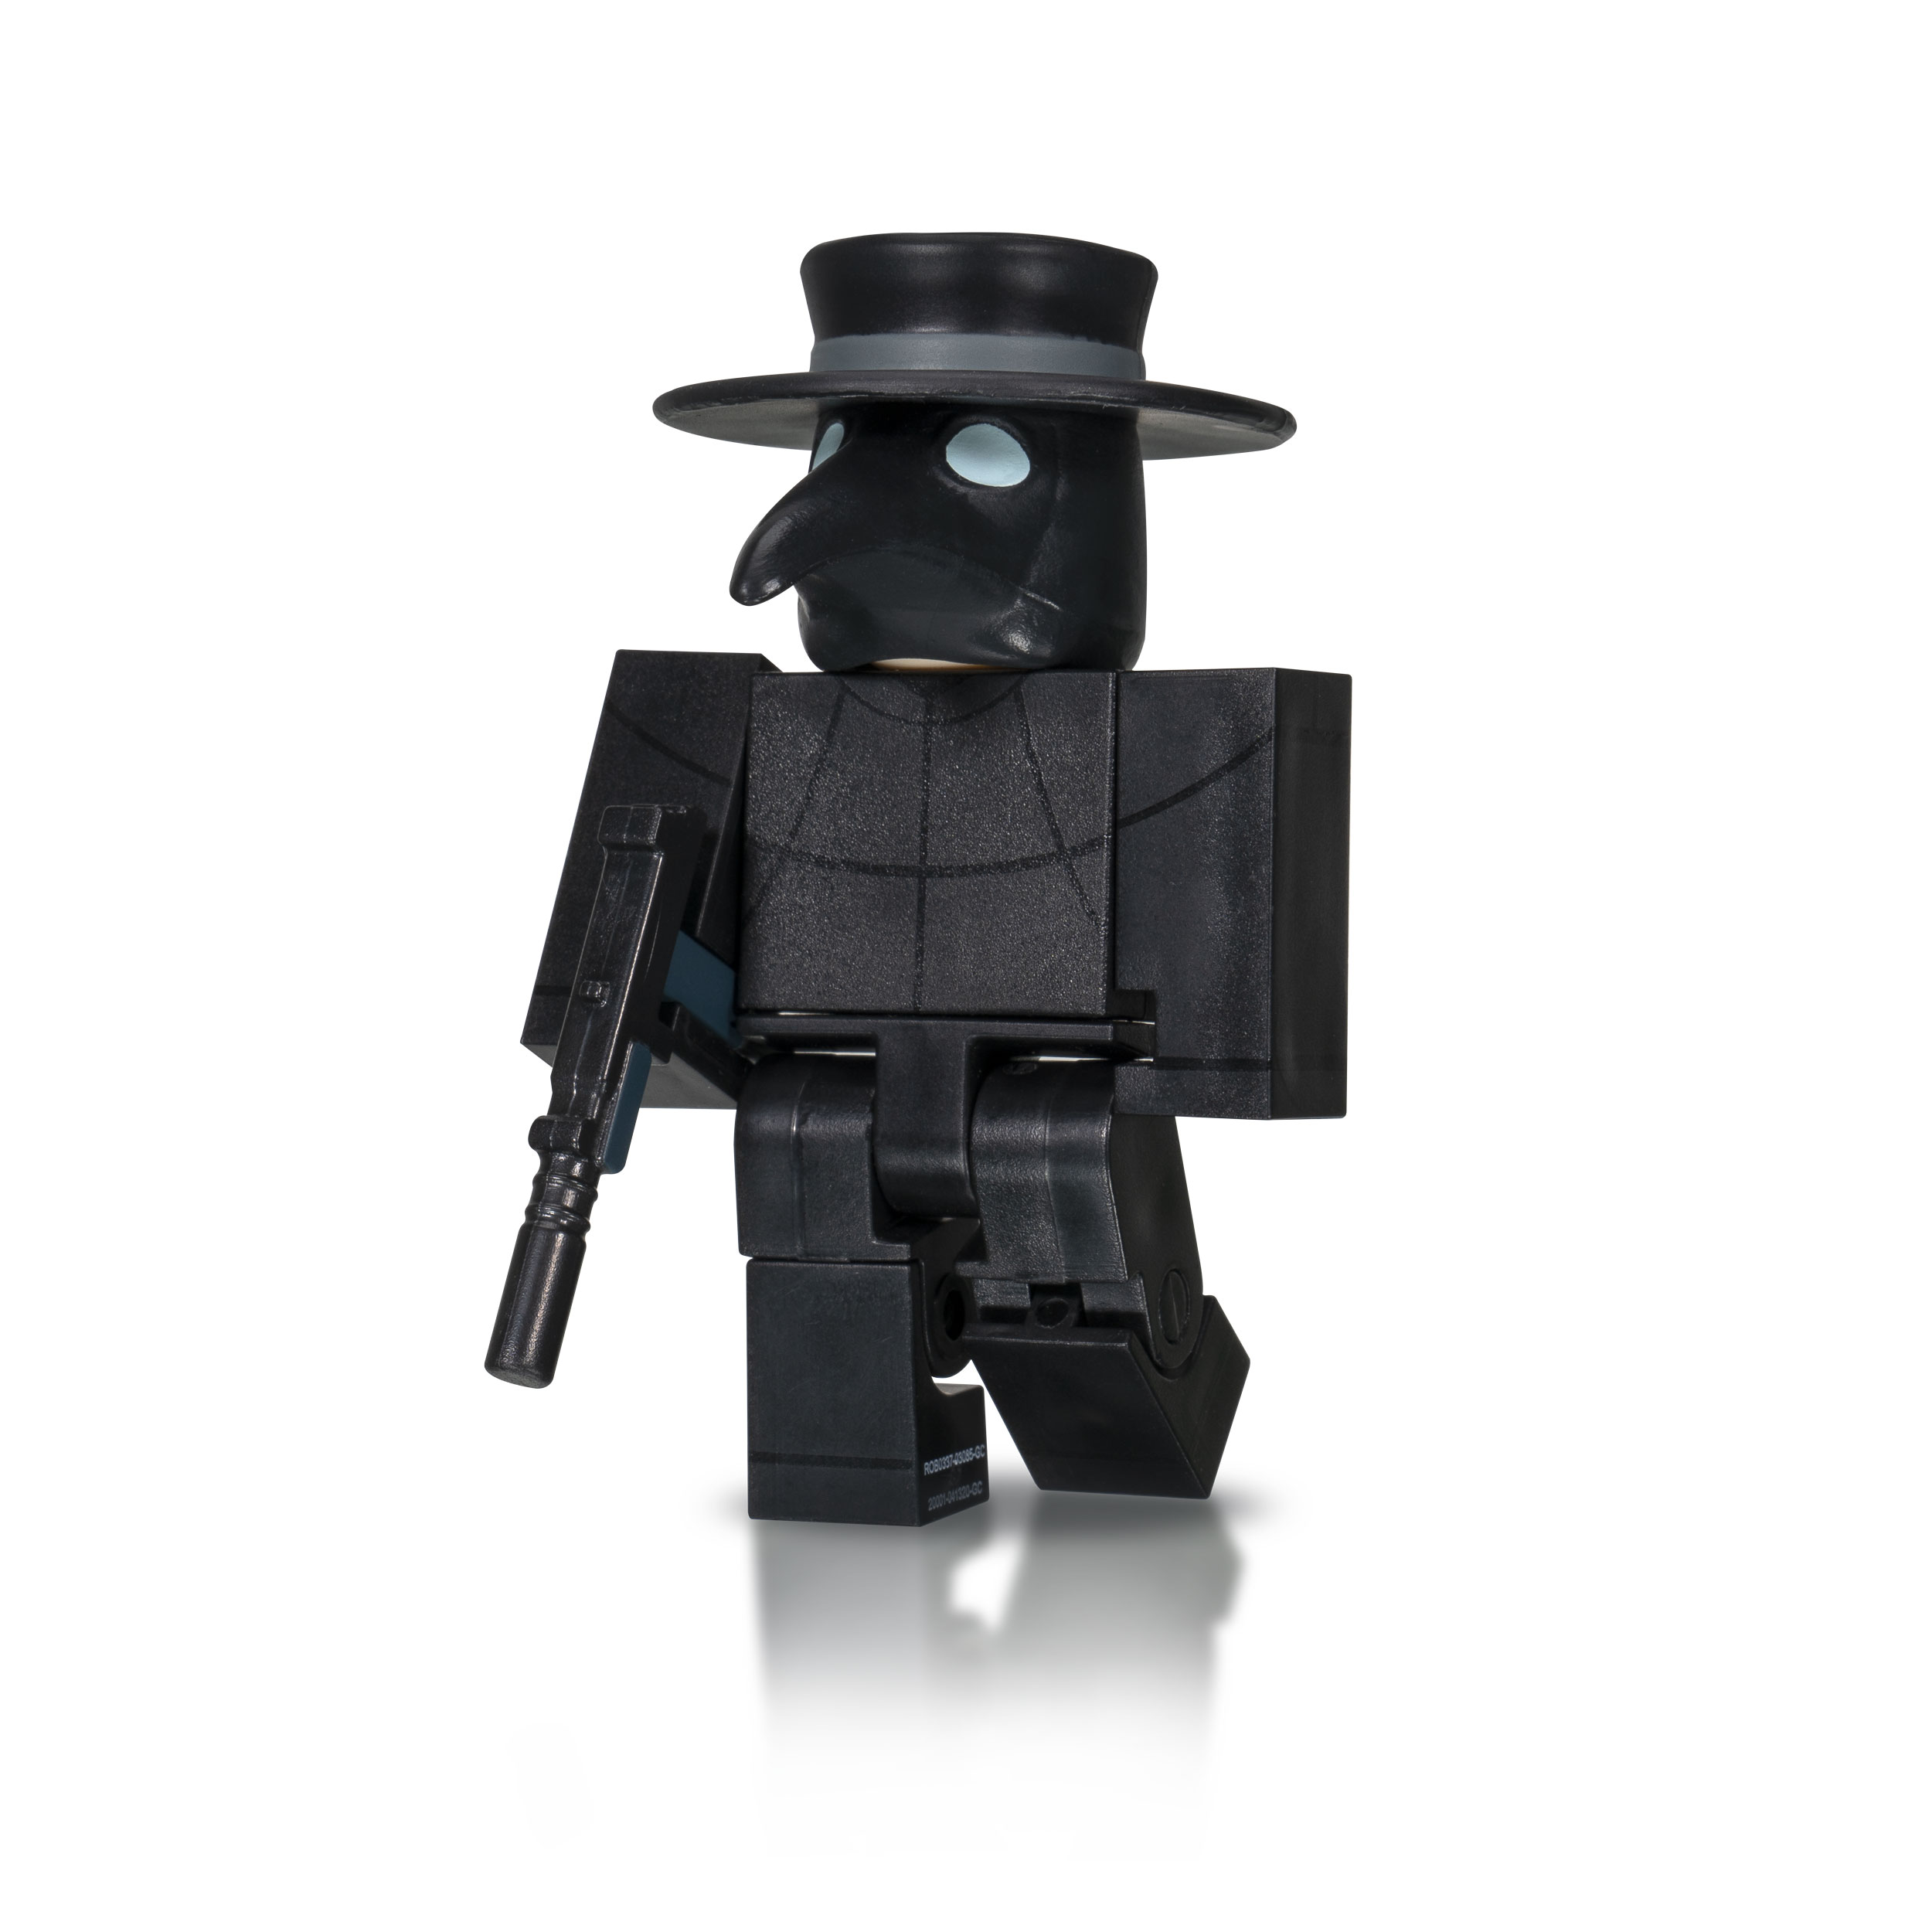 Buy Roblox Action Collection Apocalypse Rising 2 Six Figure Pack Includes Exclusive Virtual Item Online In Taiwan 151632472 - roblox philippines fedora